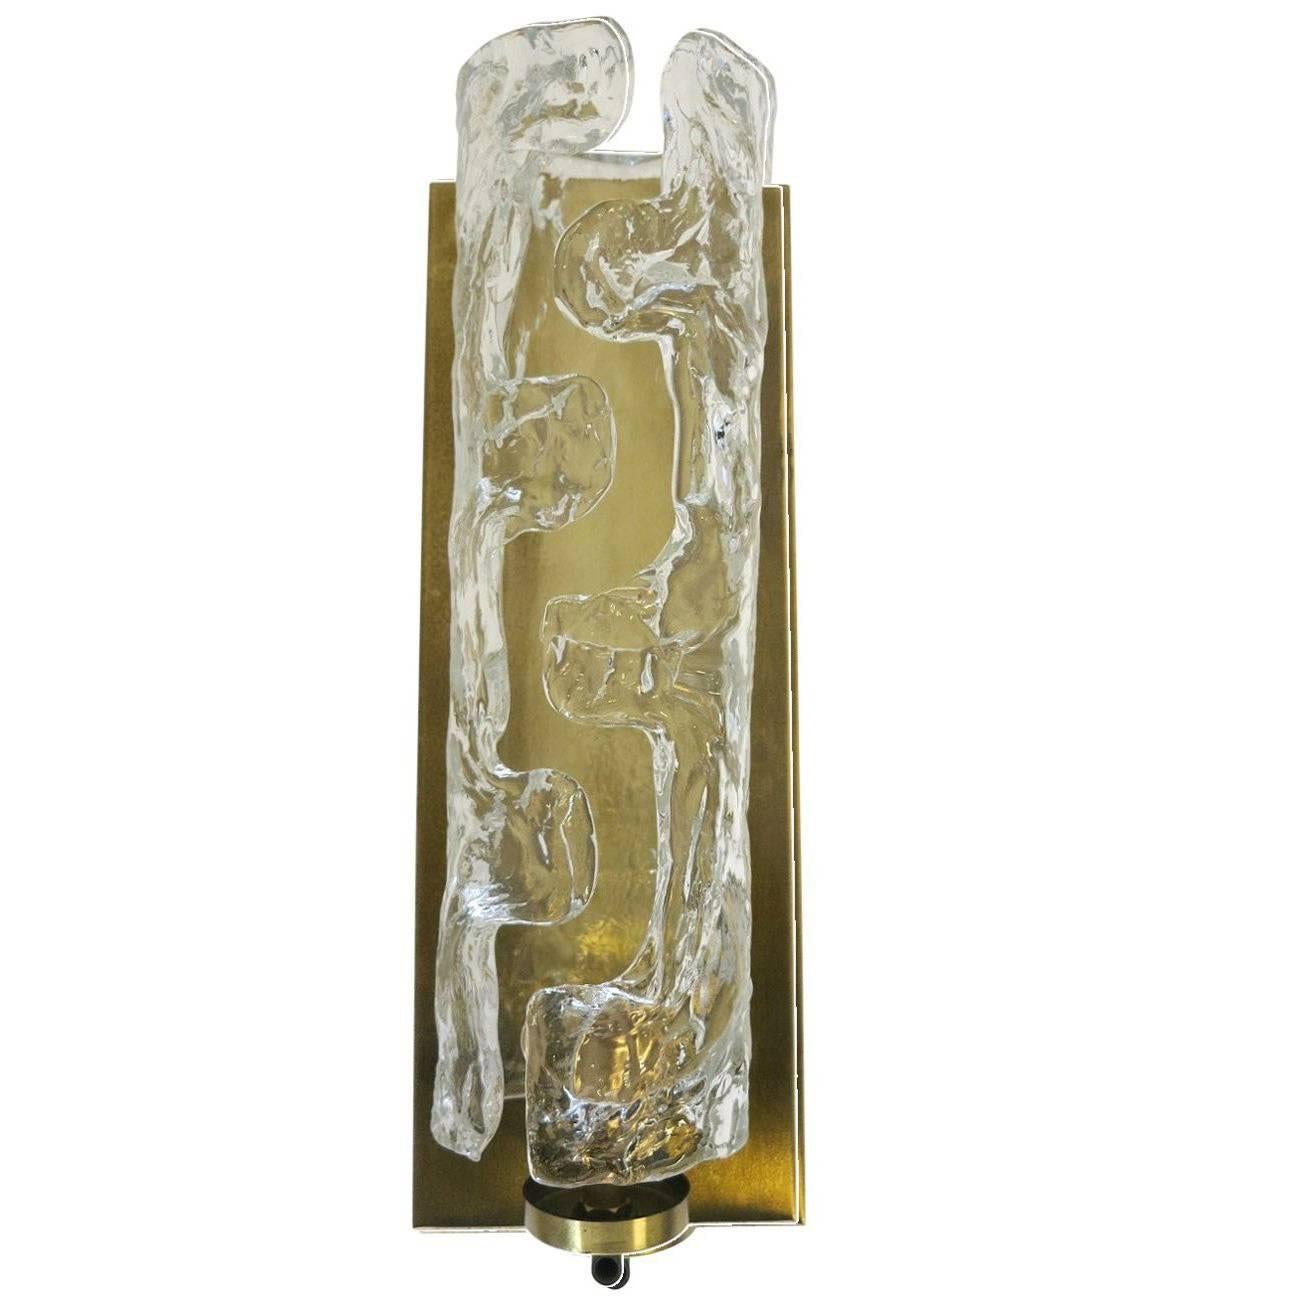 Single Cylinder Sconce by Mazzega FINAL CLEARANCE SALE